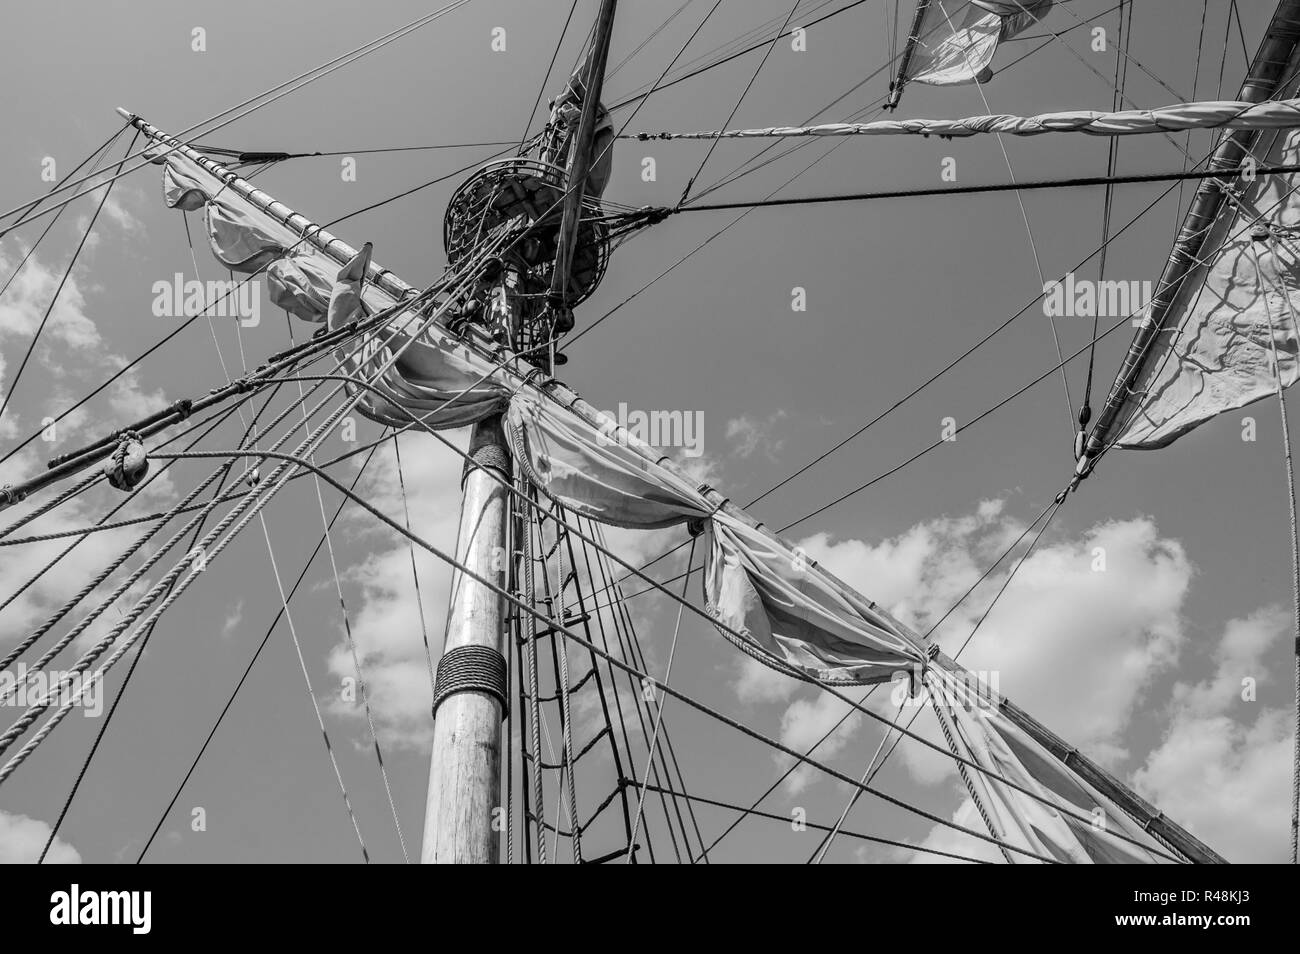 Mast with sails of an old sailing vessel, black and white photo Stock Photo